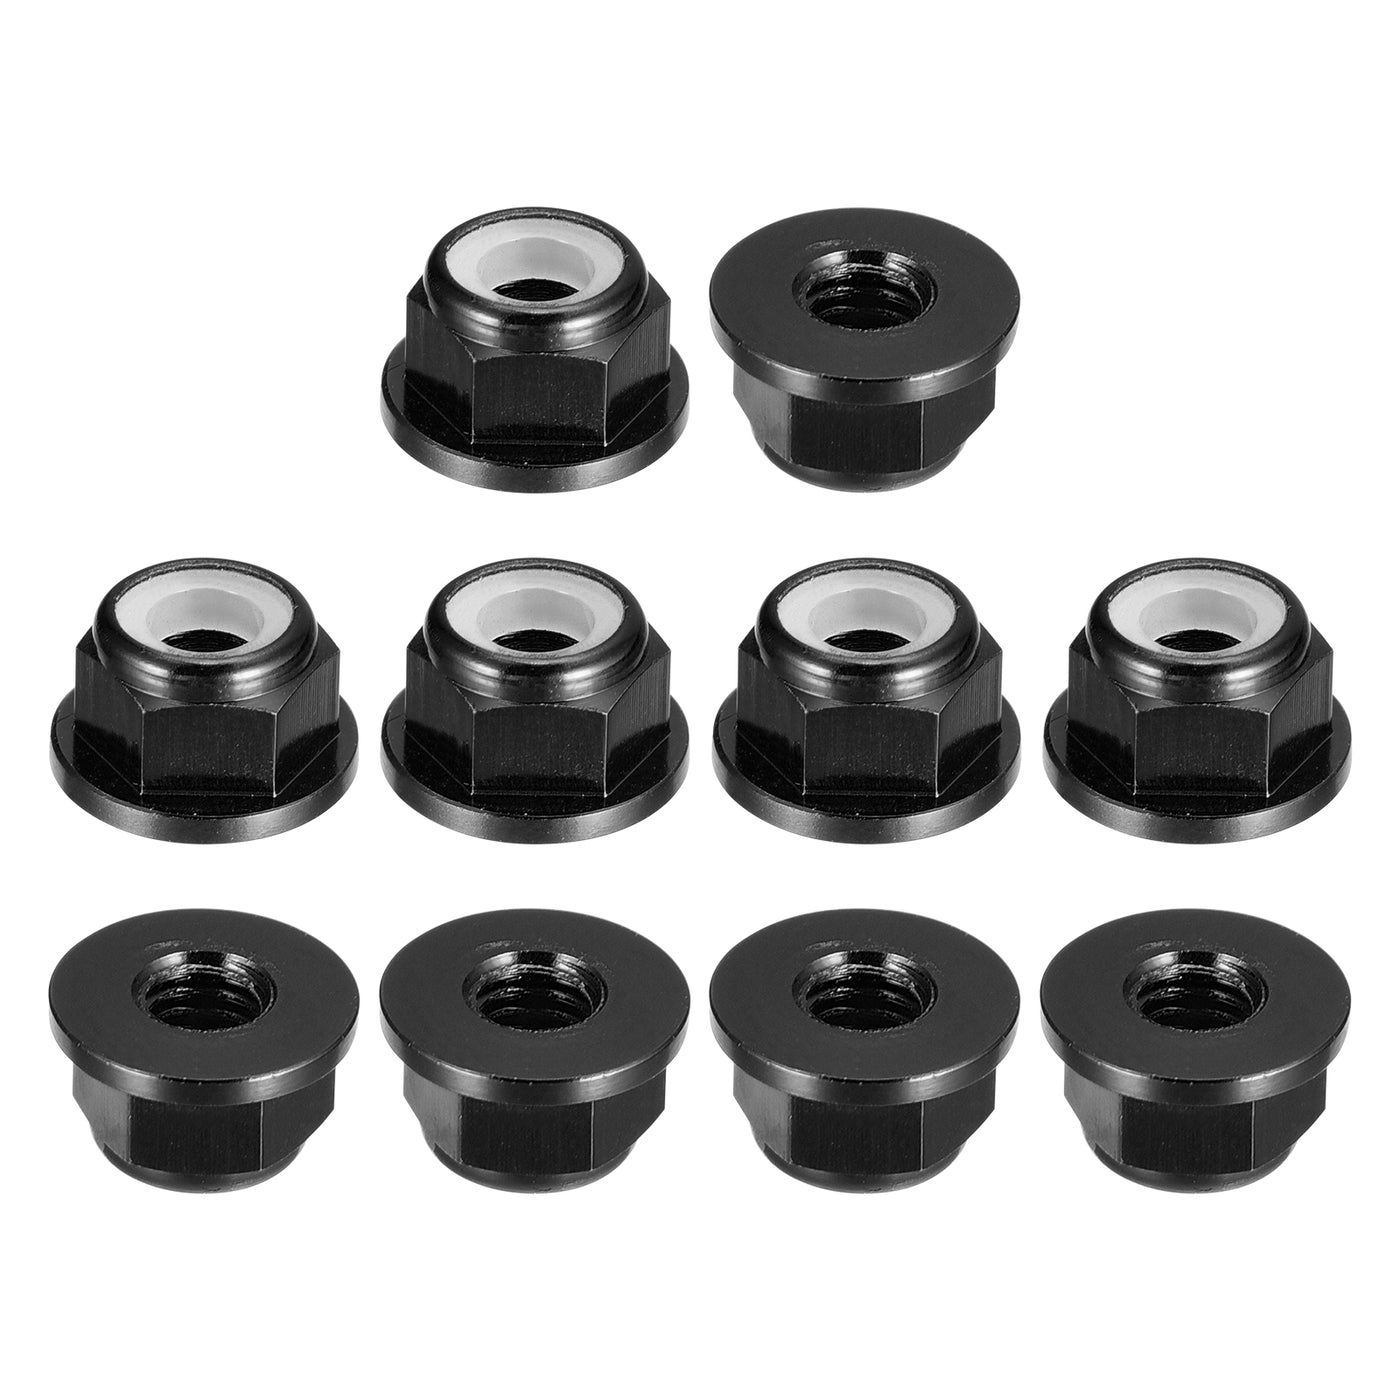 uxcell Uxcell Nylon Insert Hex Lock Nuts, 10pcs - M4 x 0.7mm Aluminum Alloy Self-Locking Nut, Anodizing Flange Lock Nut for Fasteners (Black)